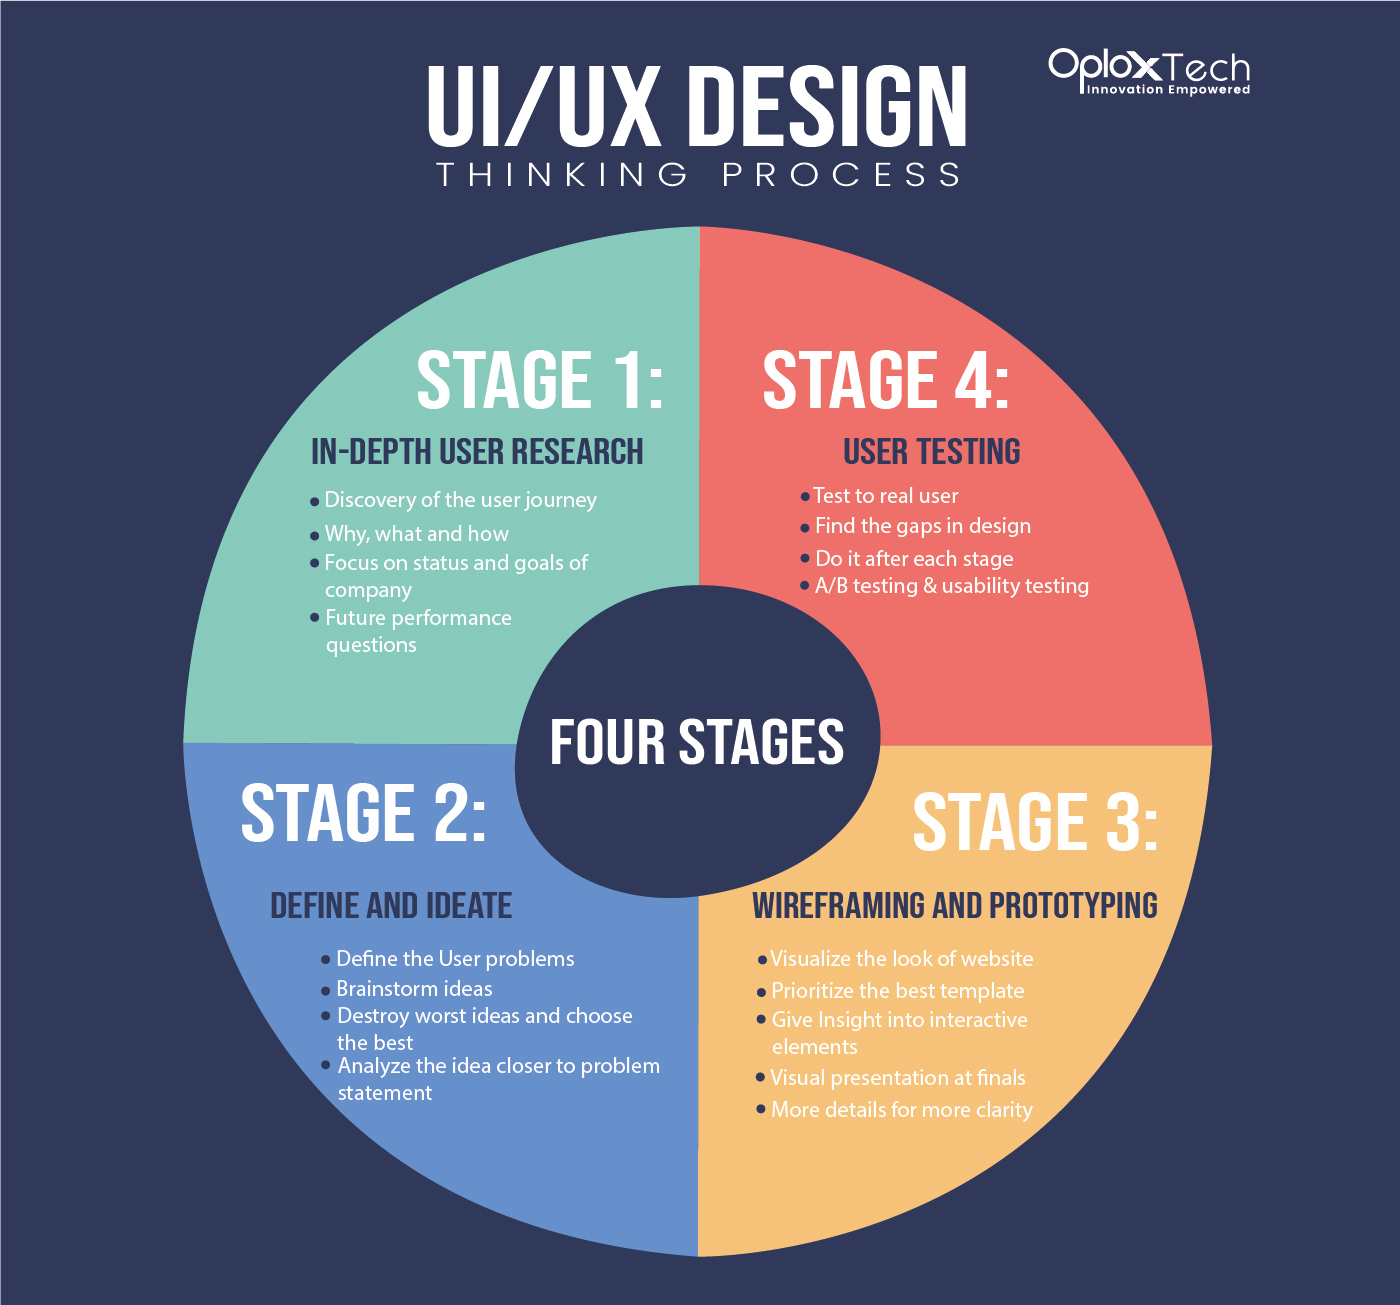 Four stages of UI/UX design thinking process